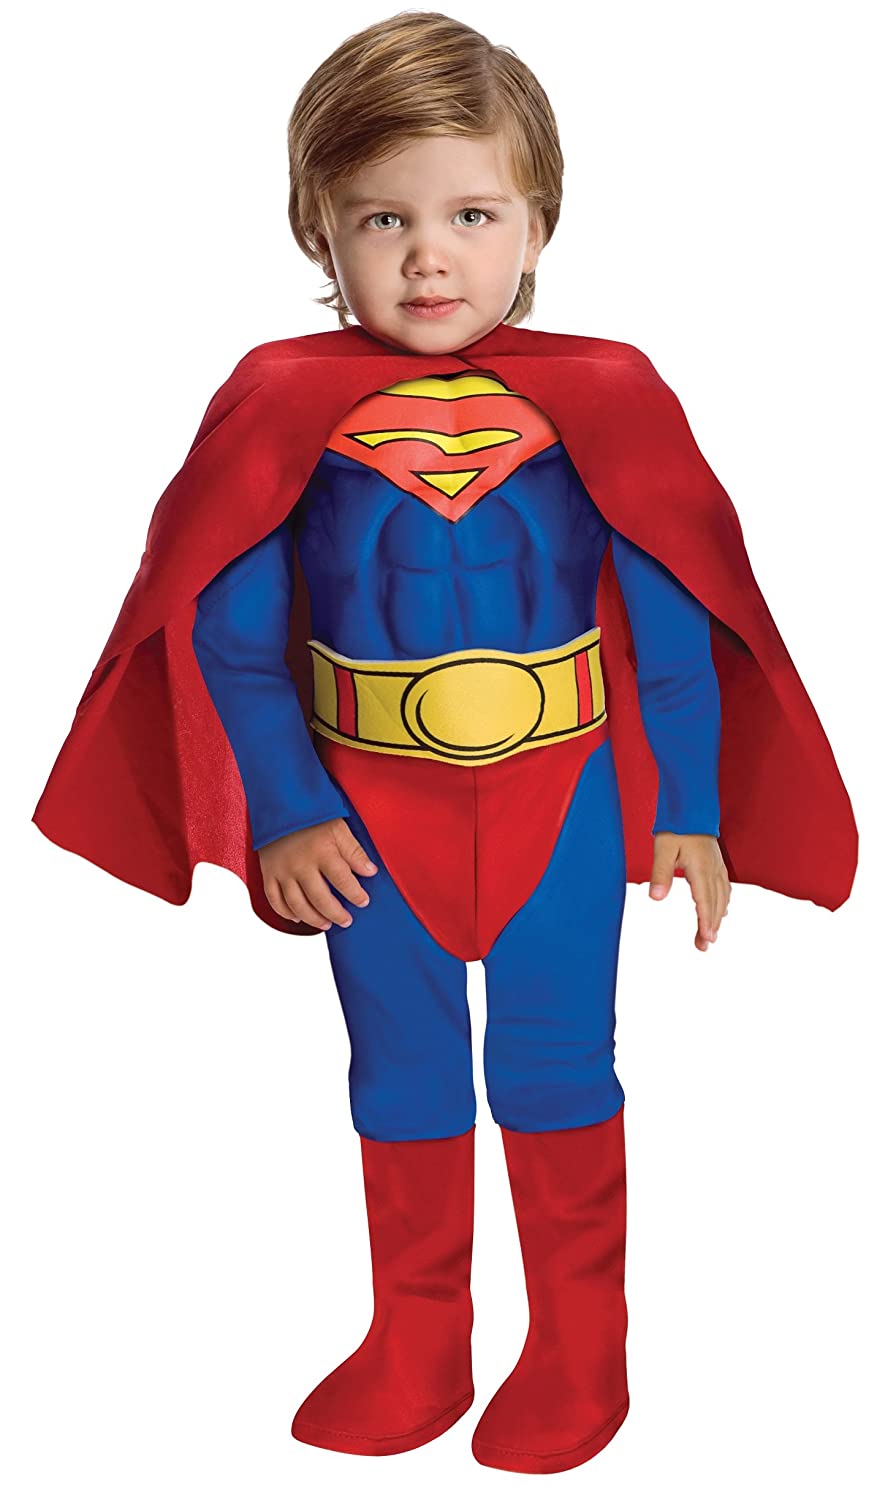 Super DC Heroes Deluxe Muscle Chest Superman Costume